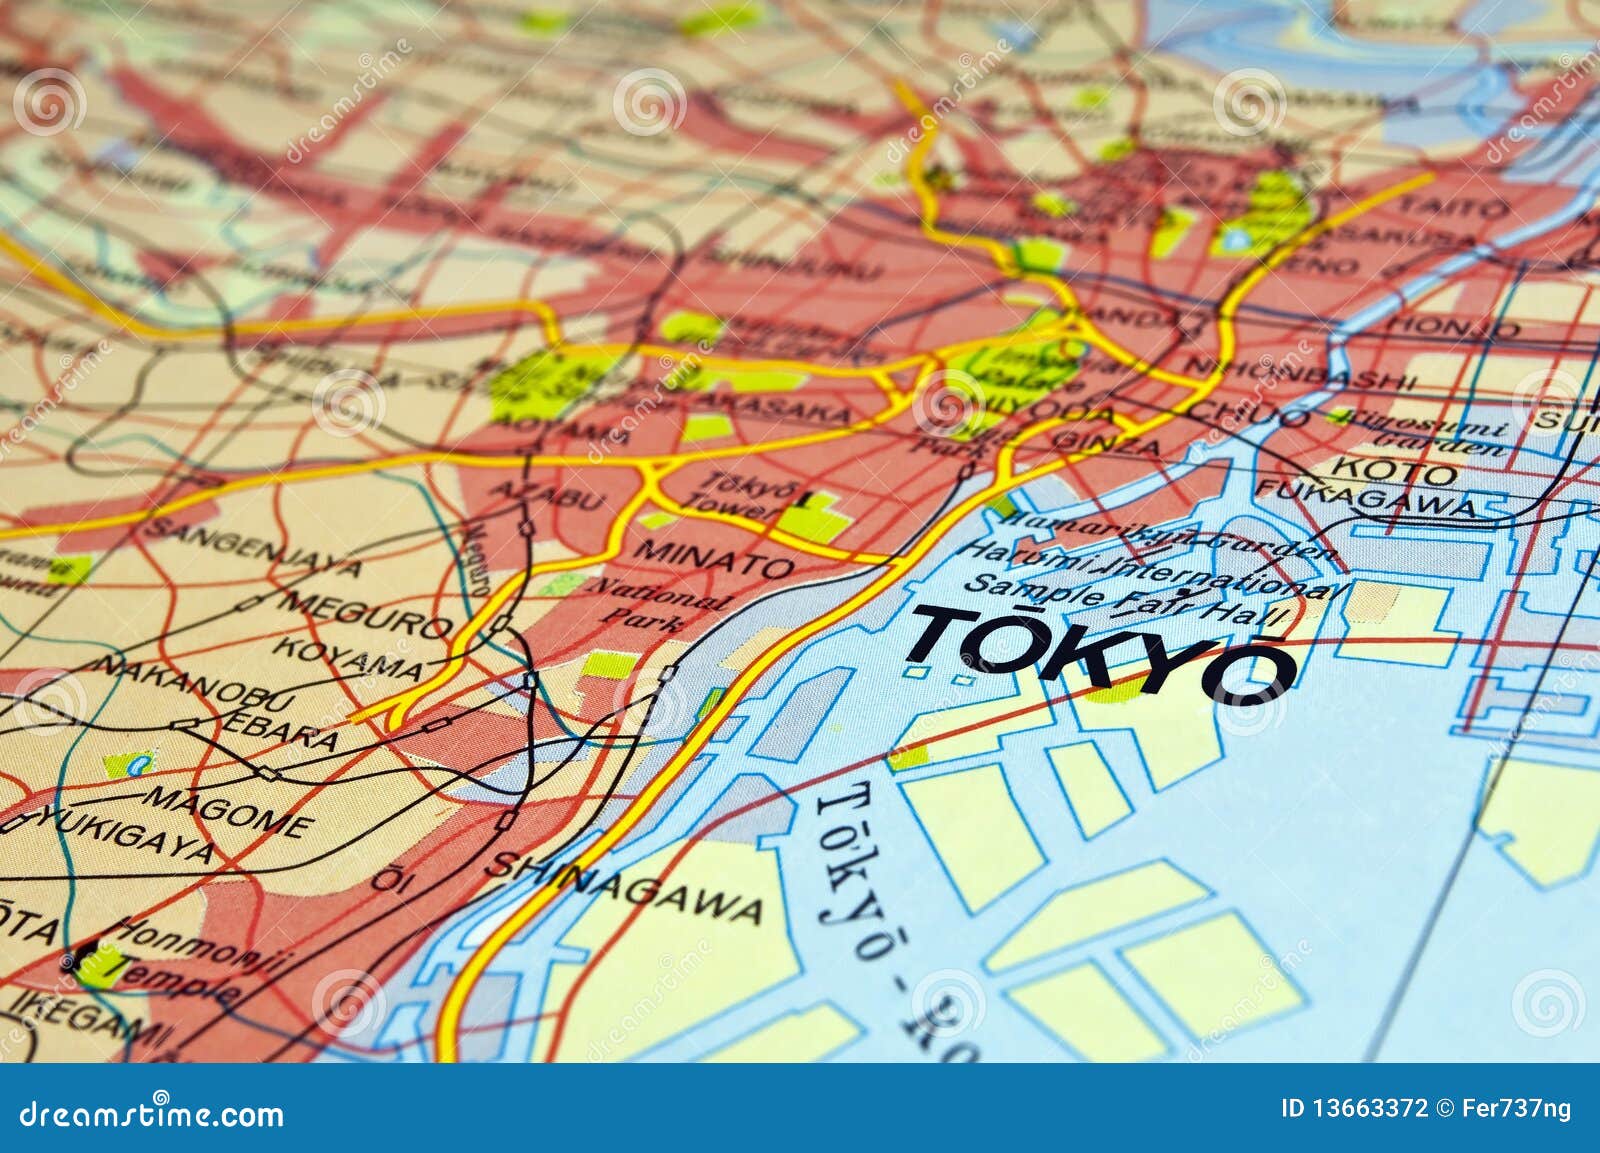 Tokyo Map Stock Photography - Image: 13663372